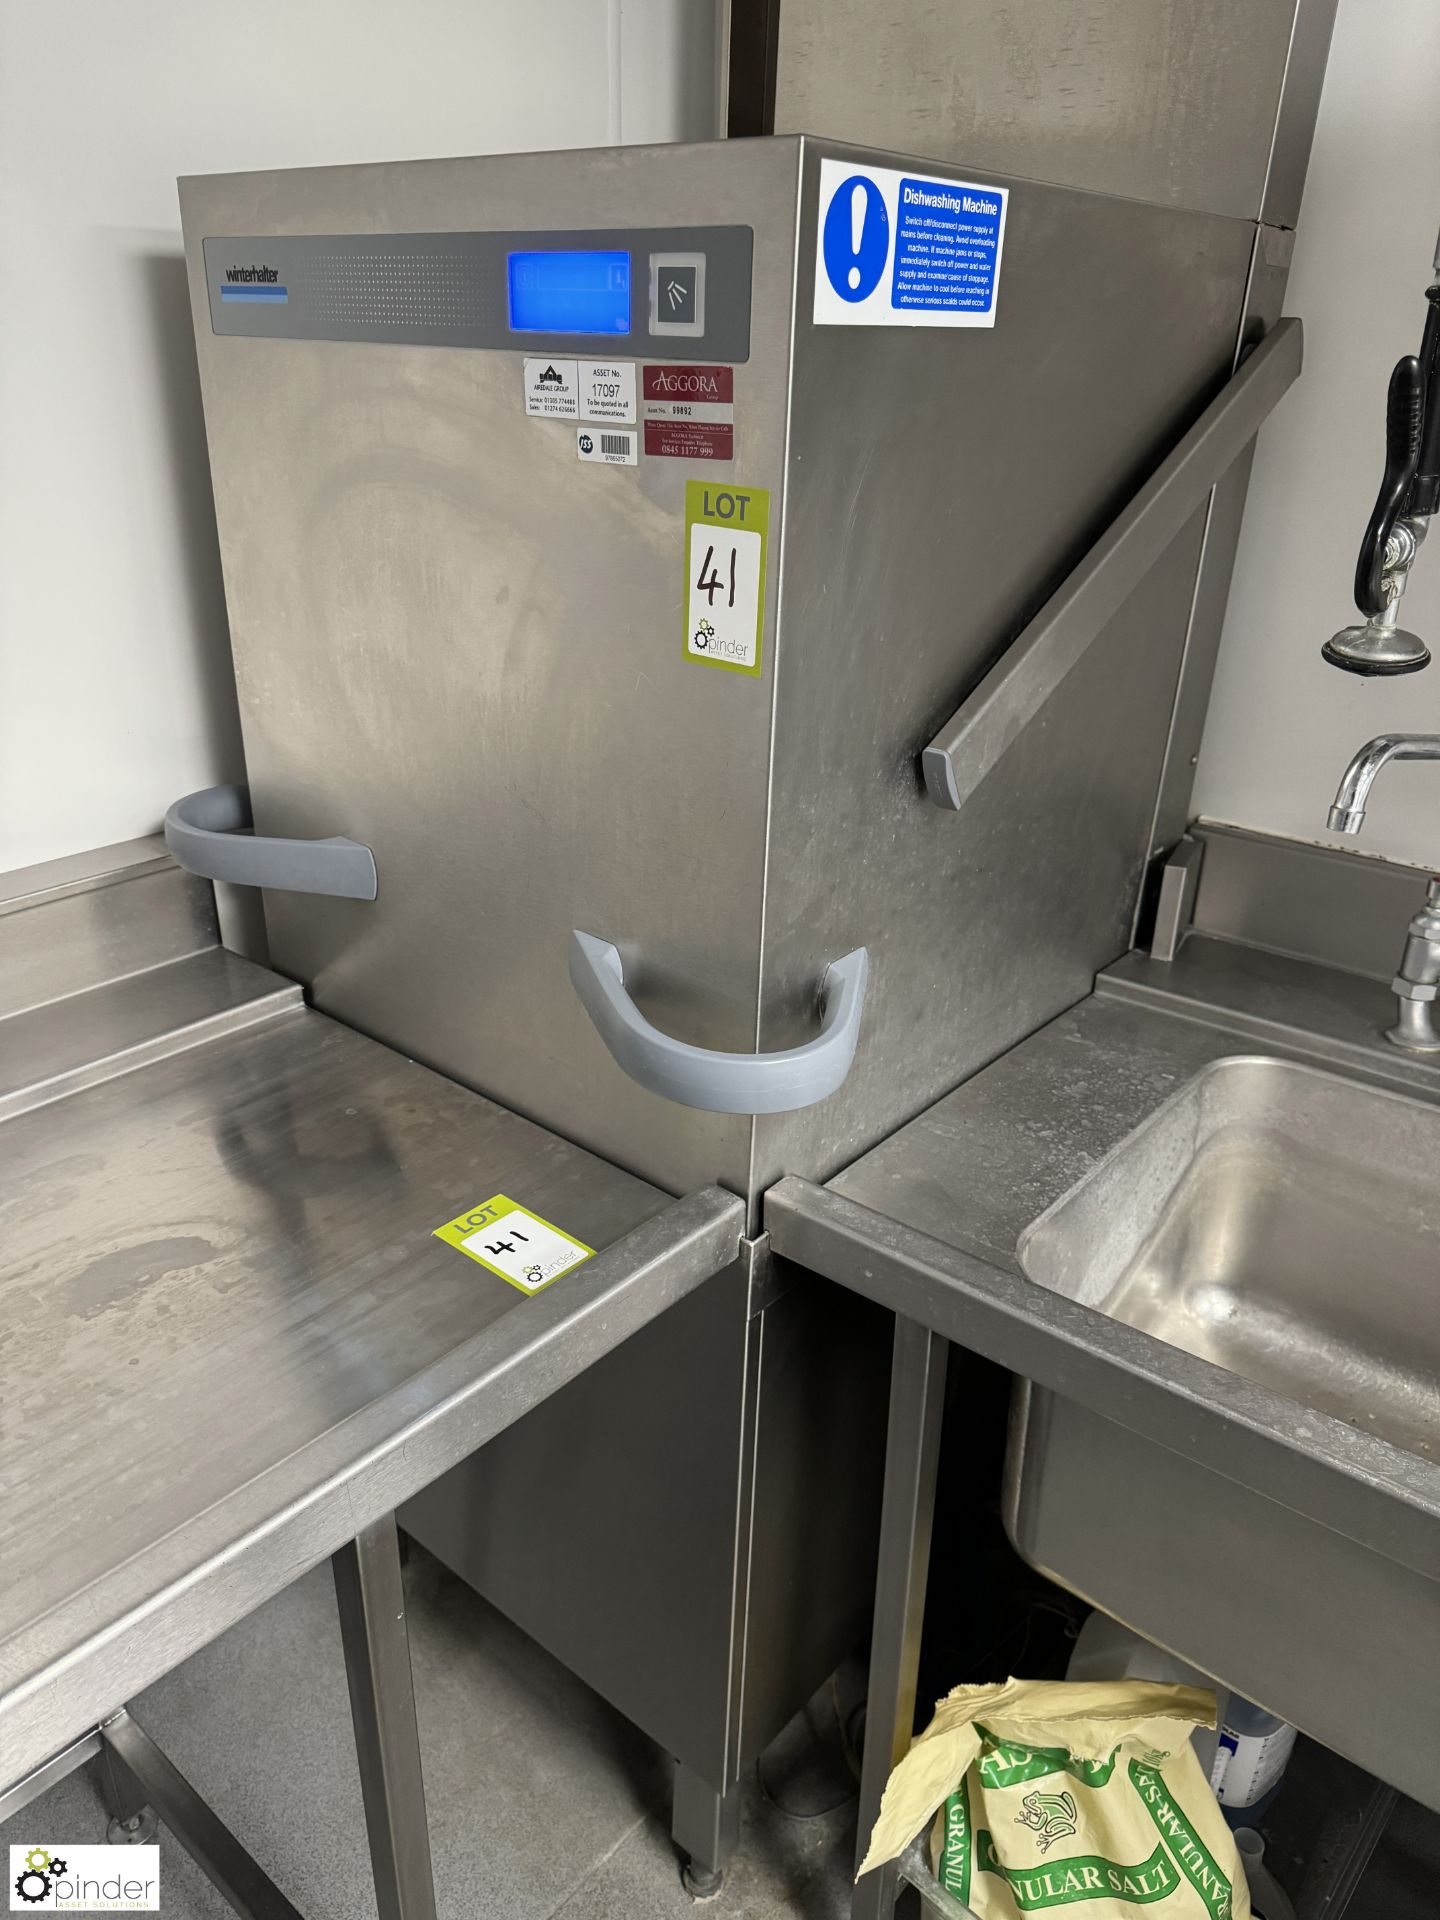 Commercial Dish Wash System, comprising Winterhalter stainless steel single tray dishwasher - Image 6 of 11